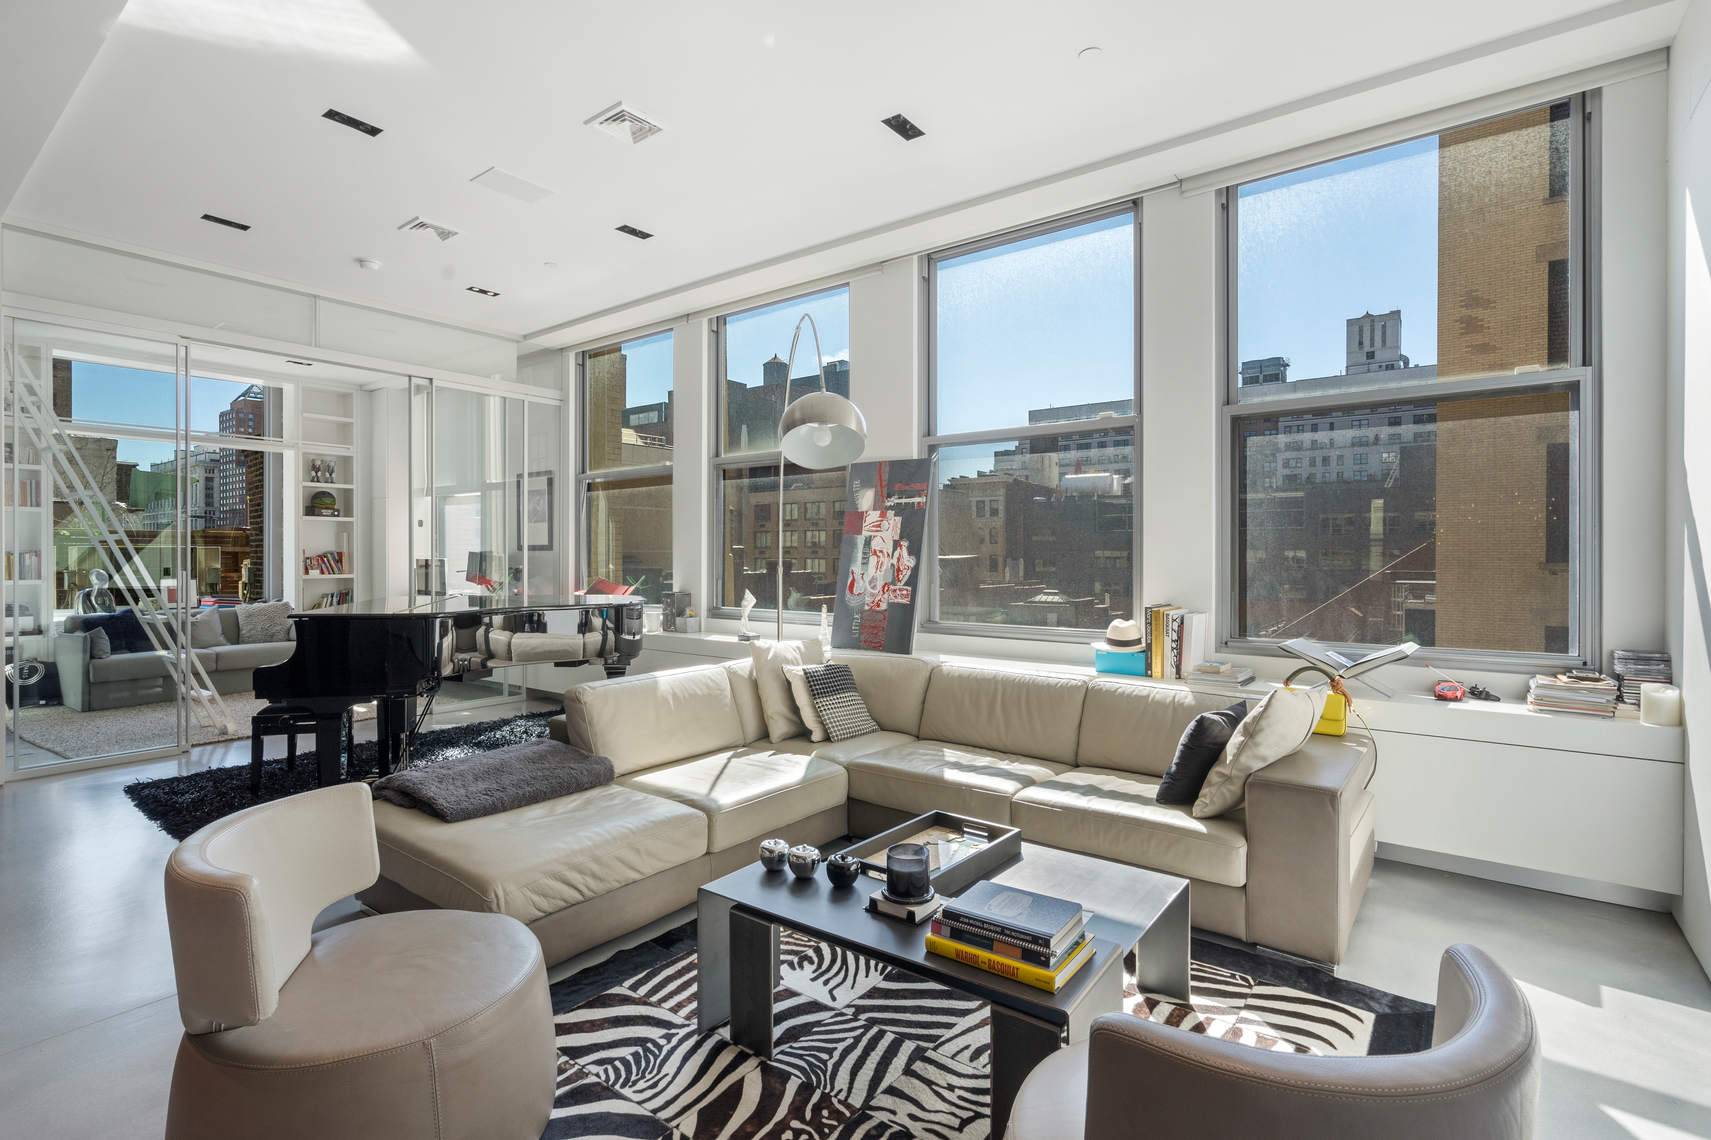 If your heart is set on a quintessential New York loft, come see this fantastic loft in the heart of Flatiron.